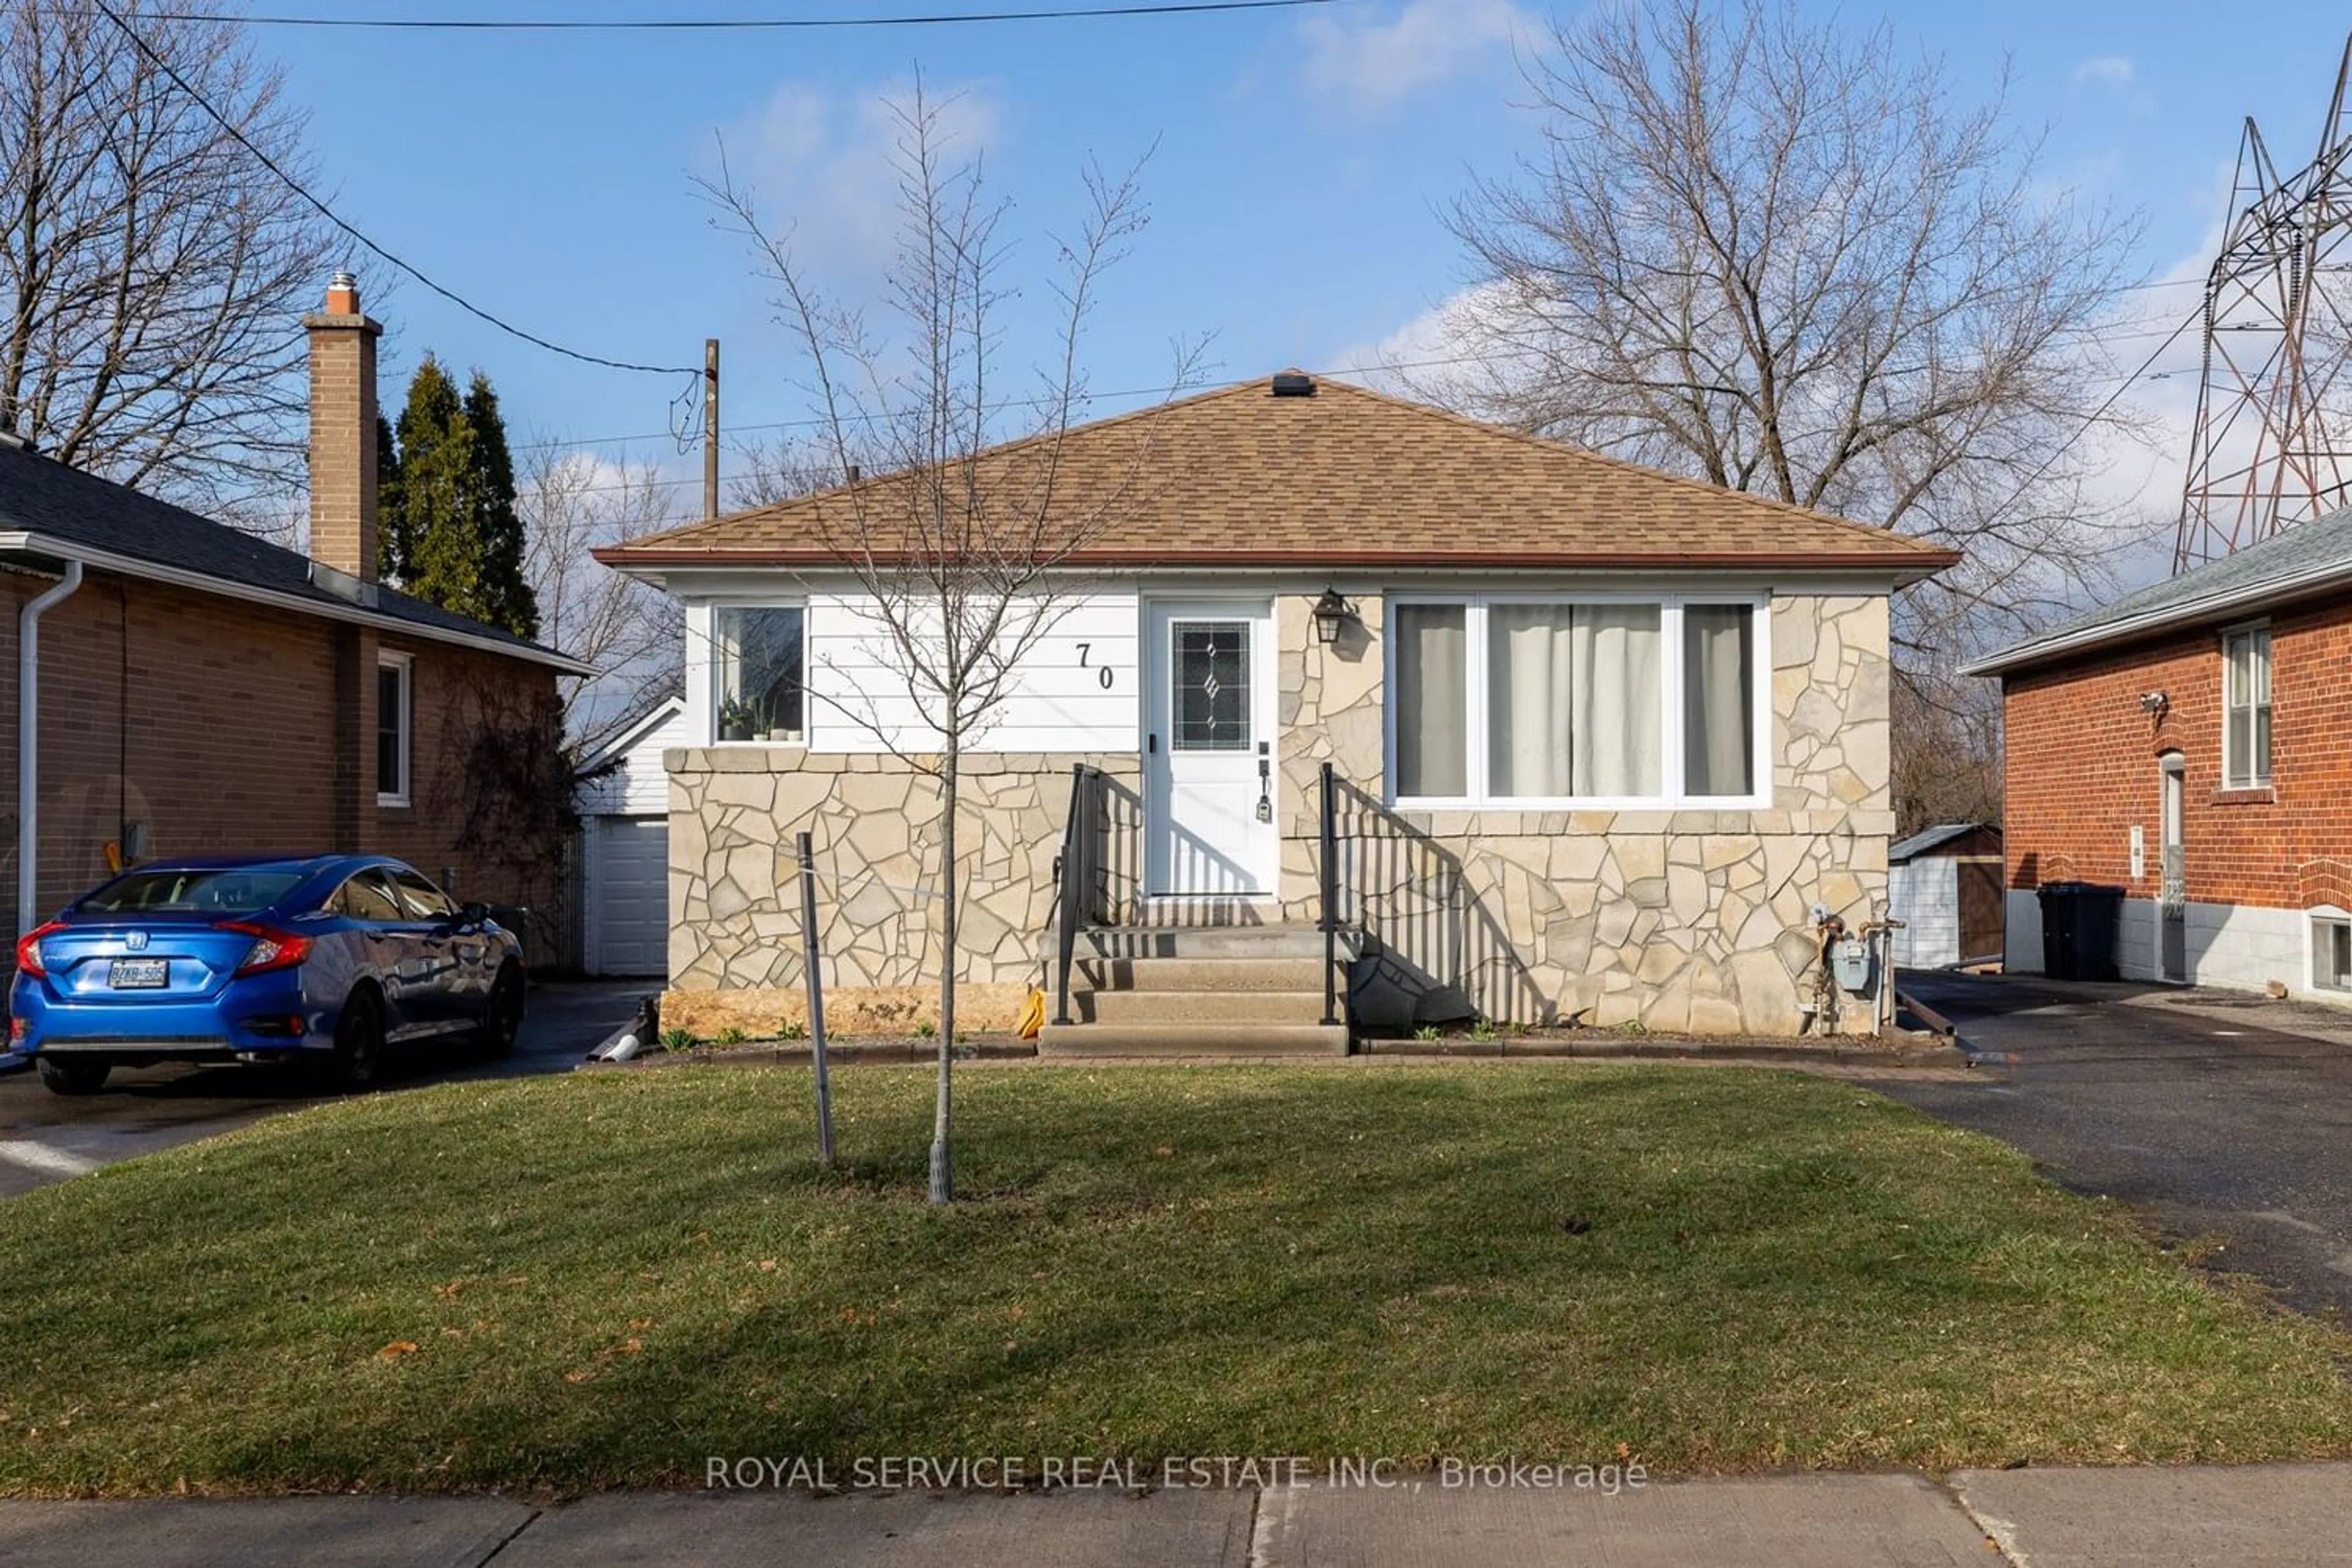 Frontside or backside of a home for 70 Crocus Dr, Toronto Ontario M1R 4S6